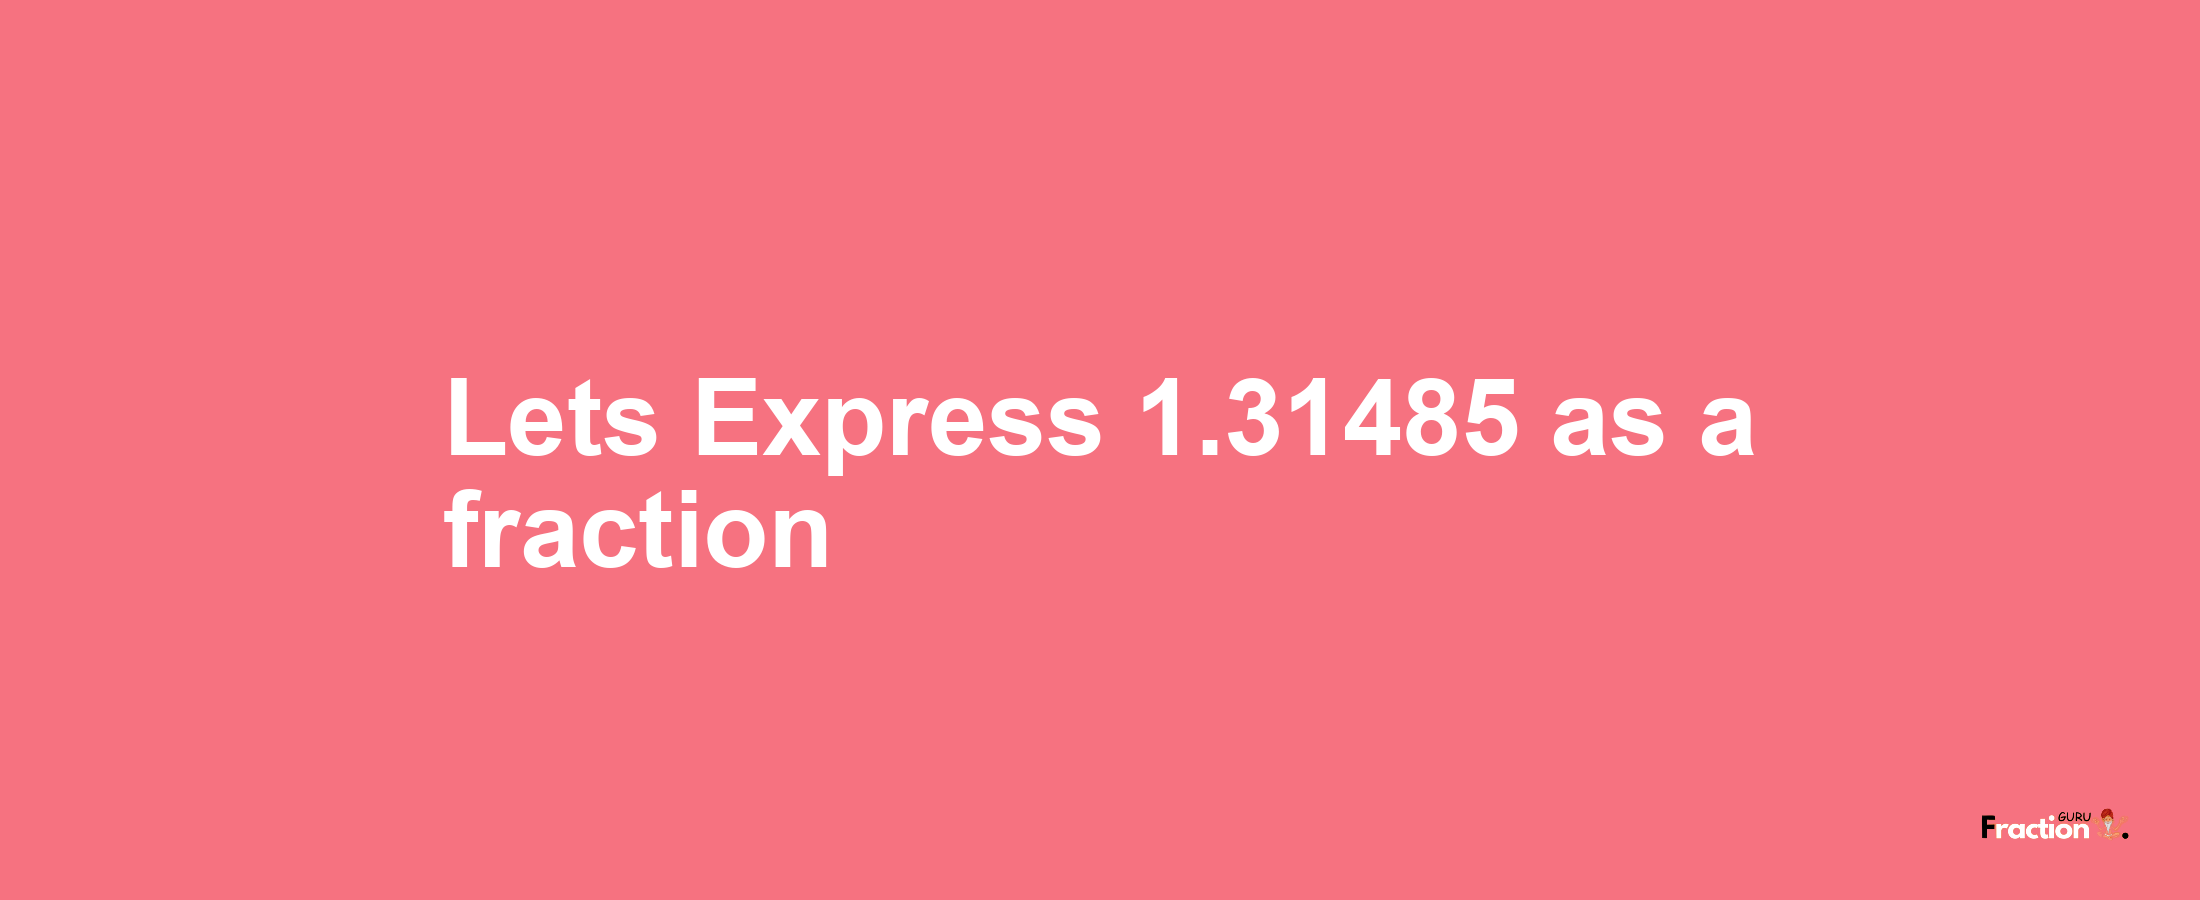 Lets Express 1.31485 as afraction